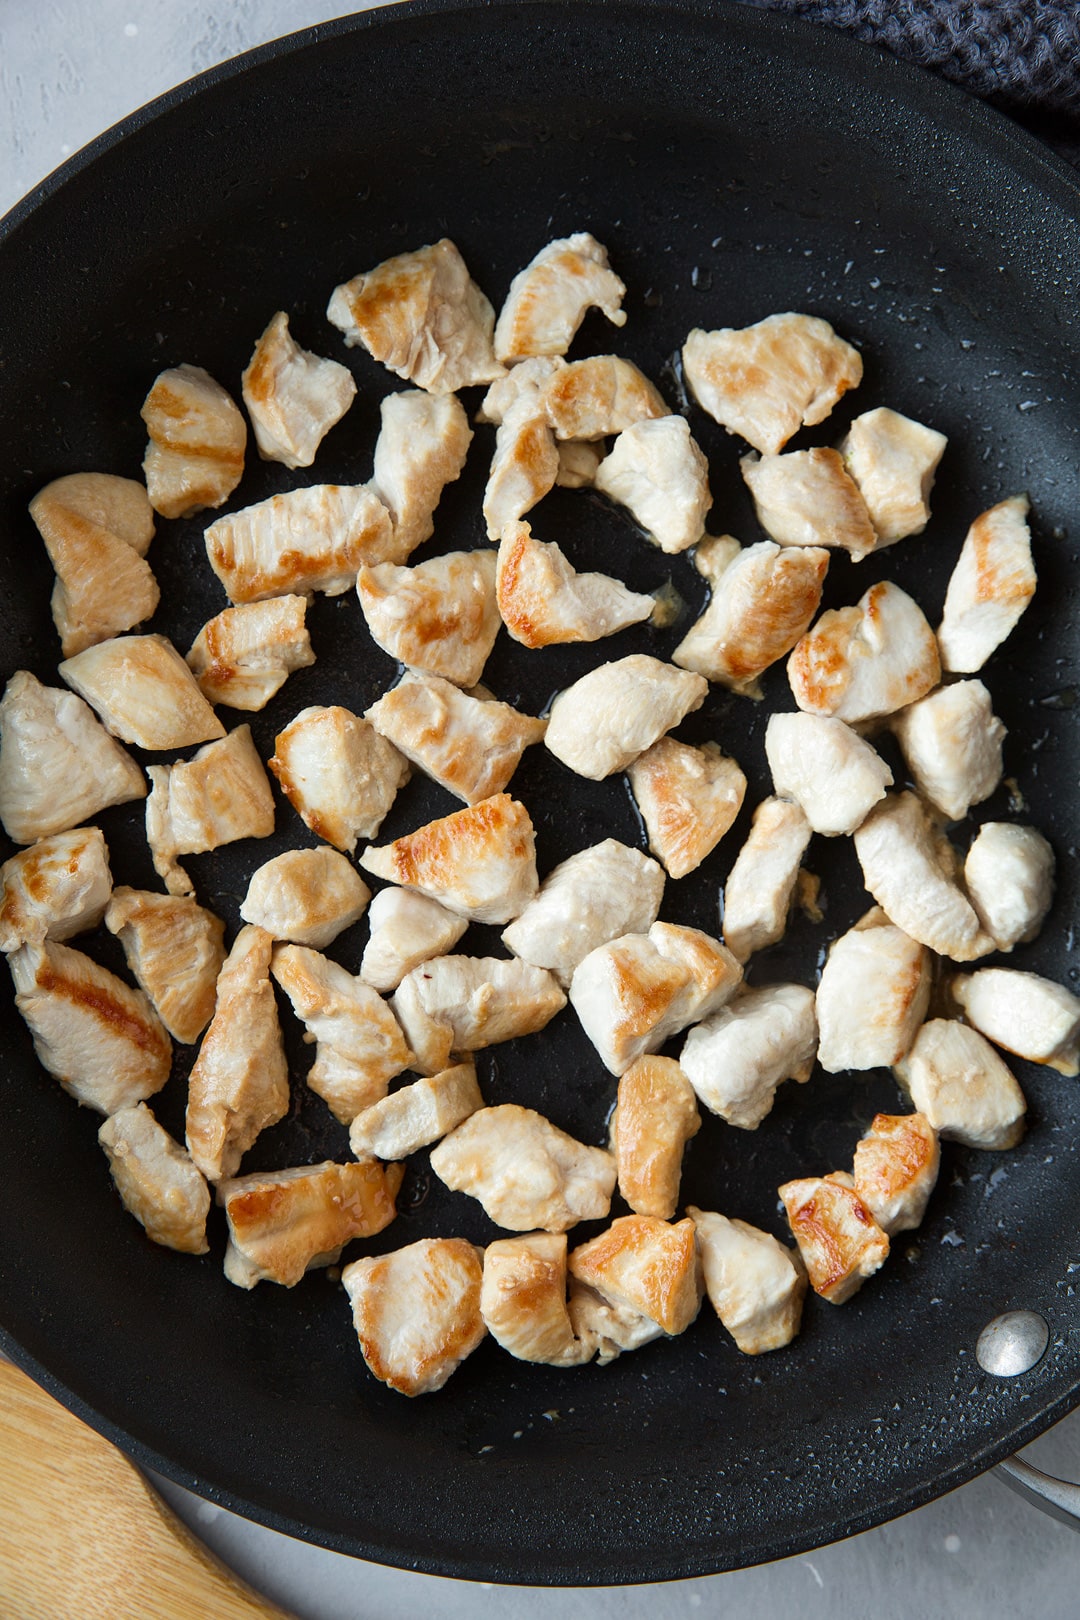 Chicken pieces browned in skillet for chicken broccoli stir fry